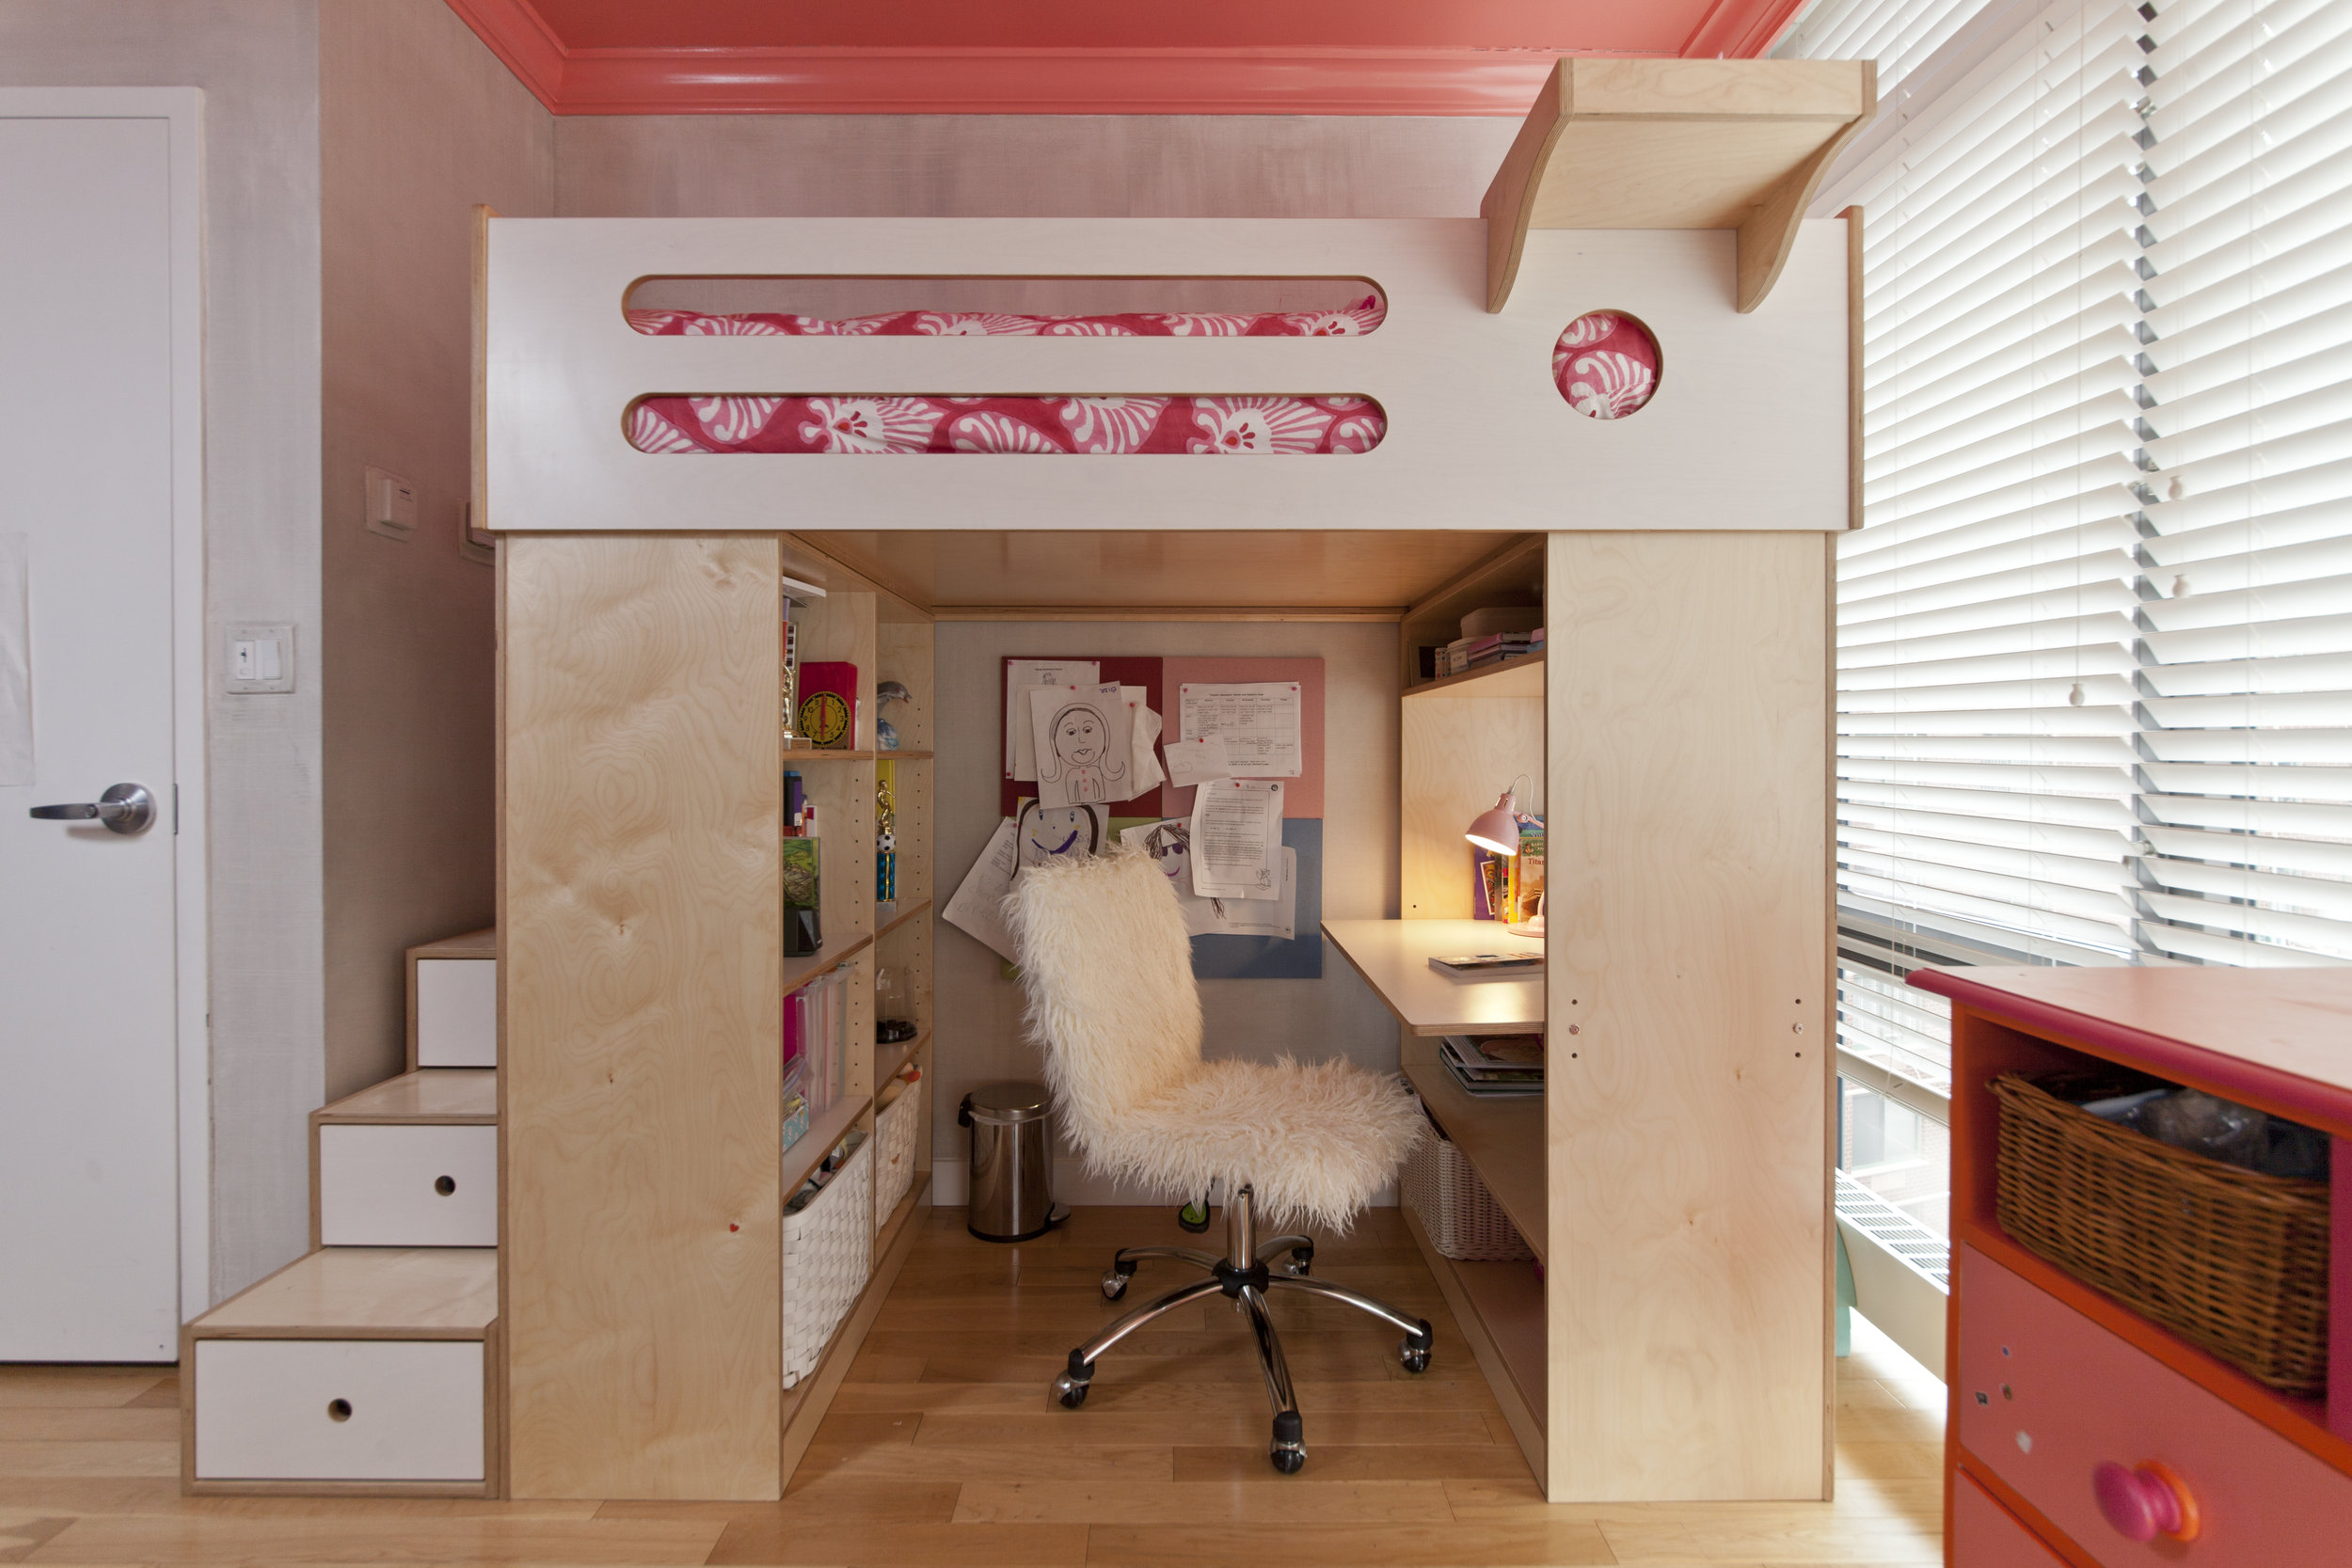 kids low cabin bed